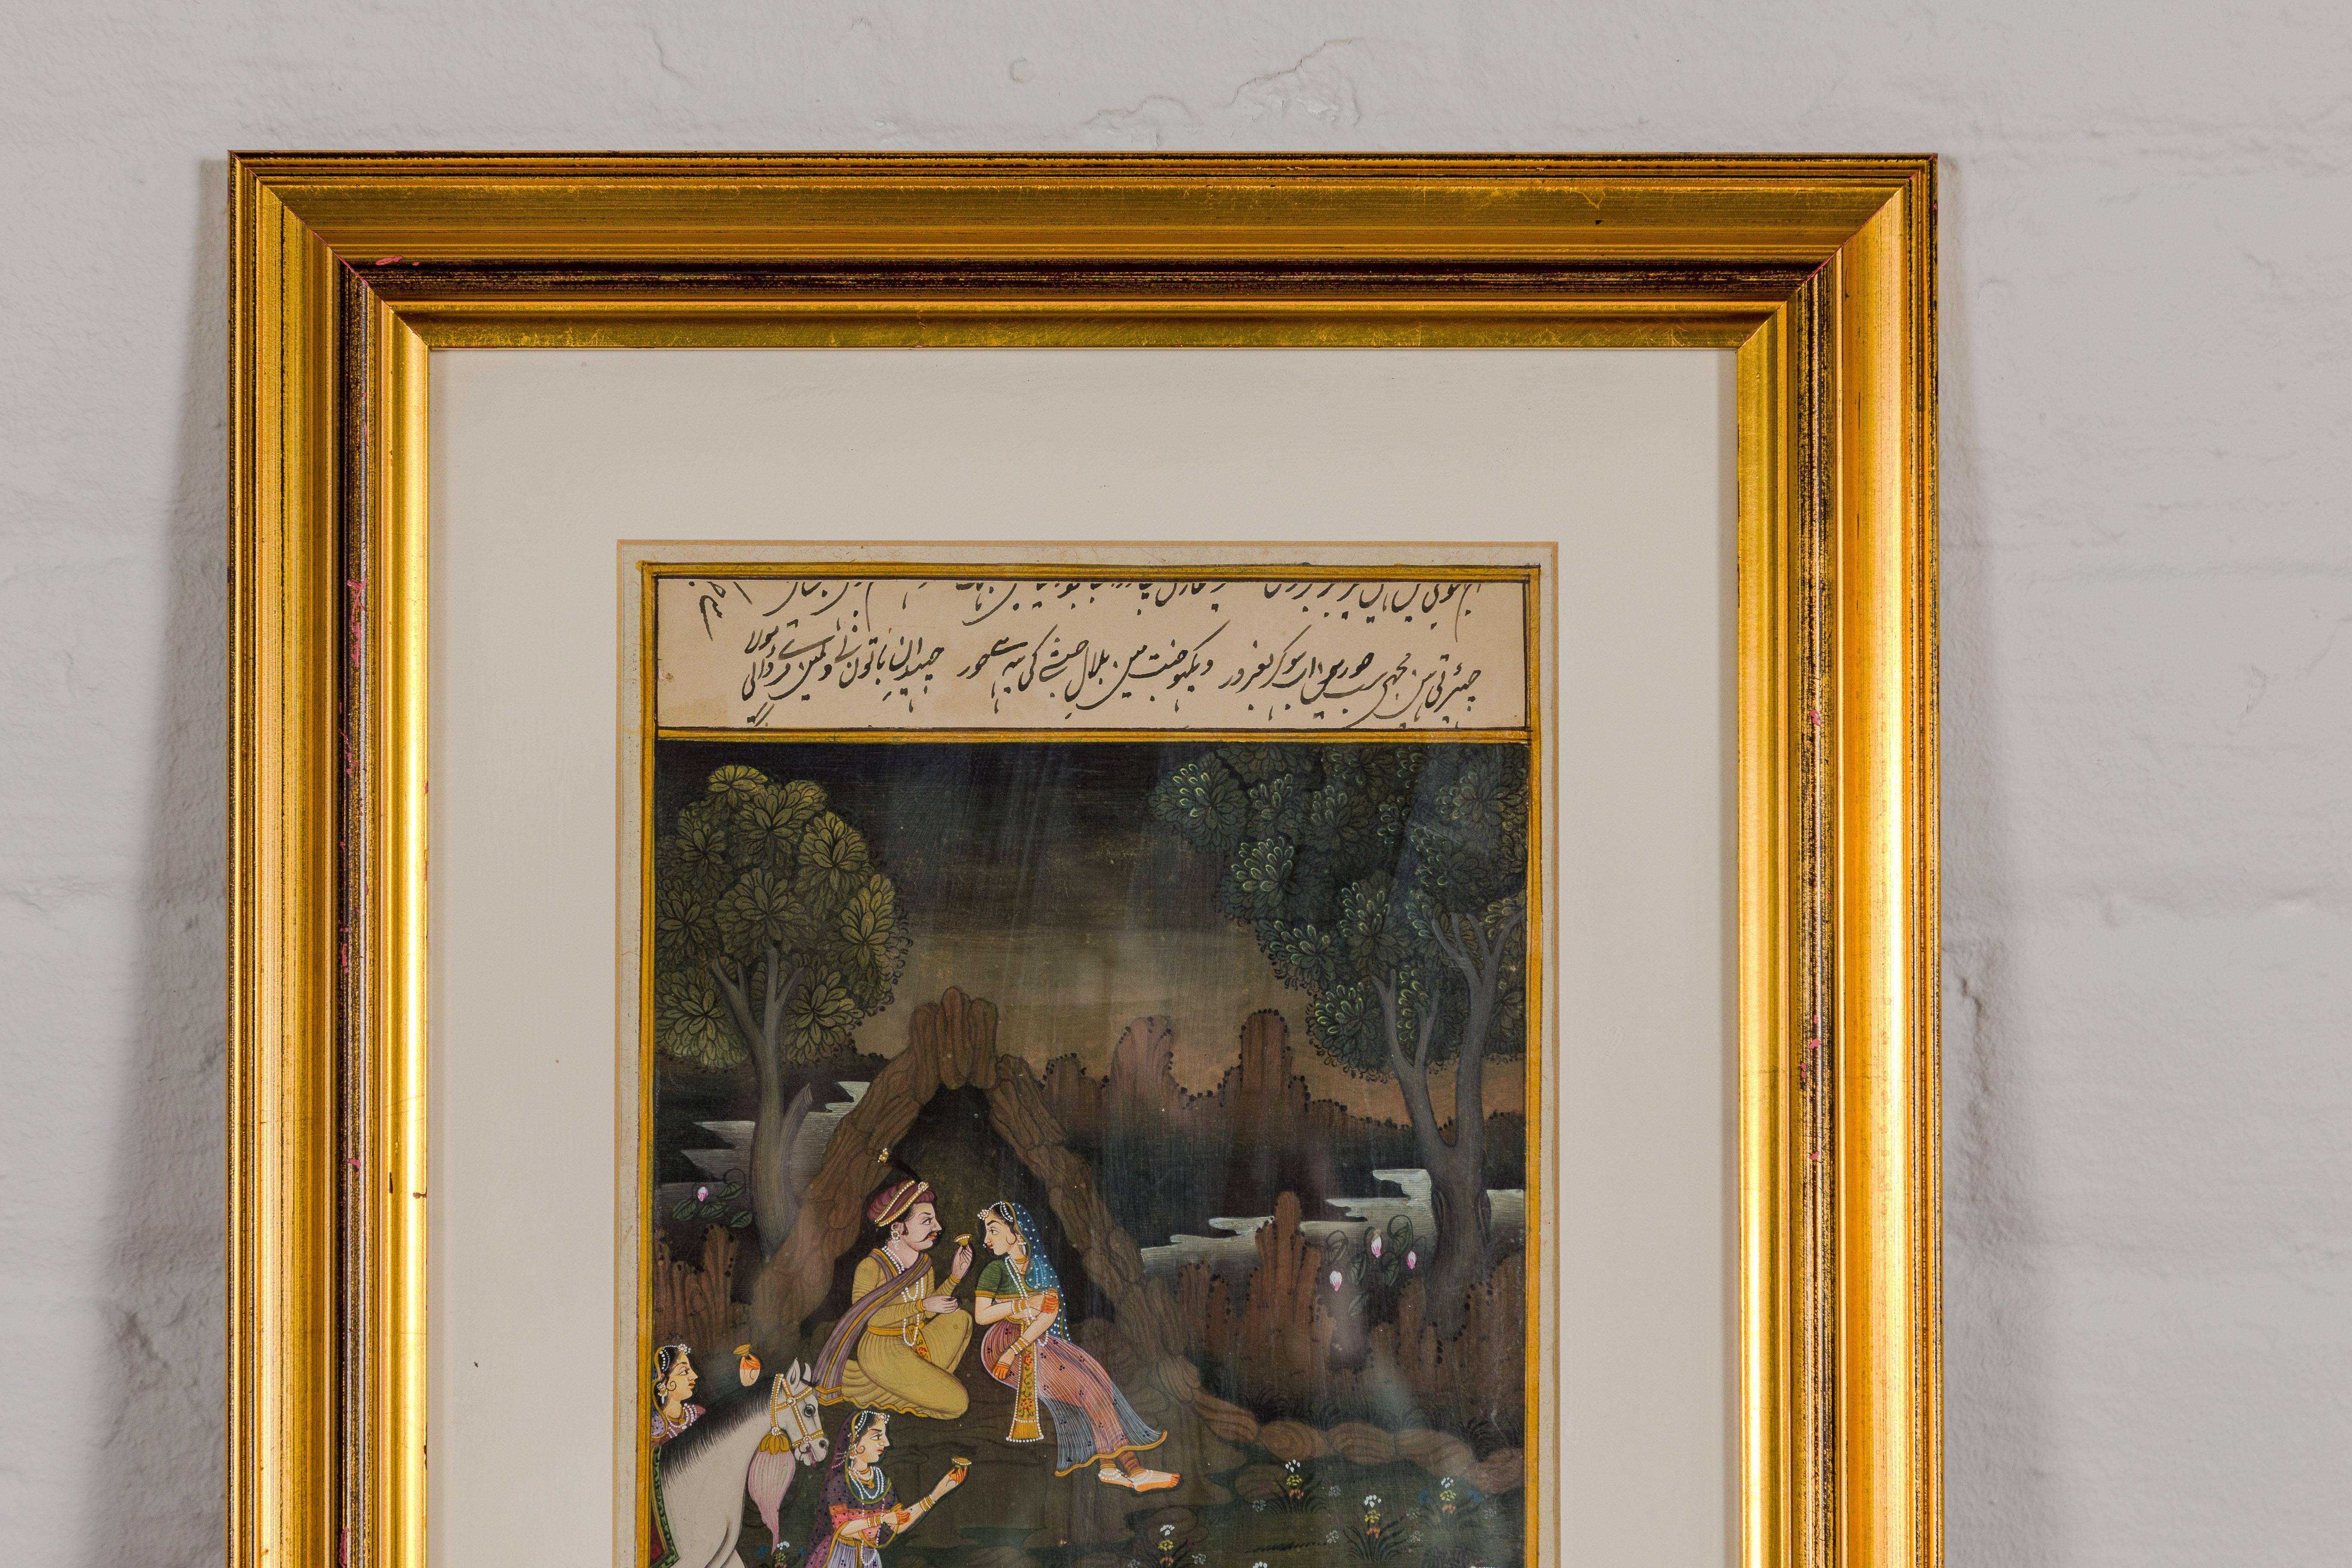 A small vintage Mughal style Indian painting depicting the king's harem, in custom giltwood frame. This exquisite small vintage painting, inspired by the Mughal style, offers a captivating glimpse into the king's harem, a subject rich in history and